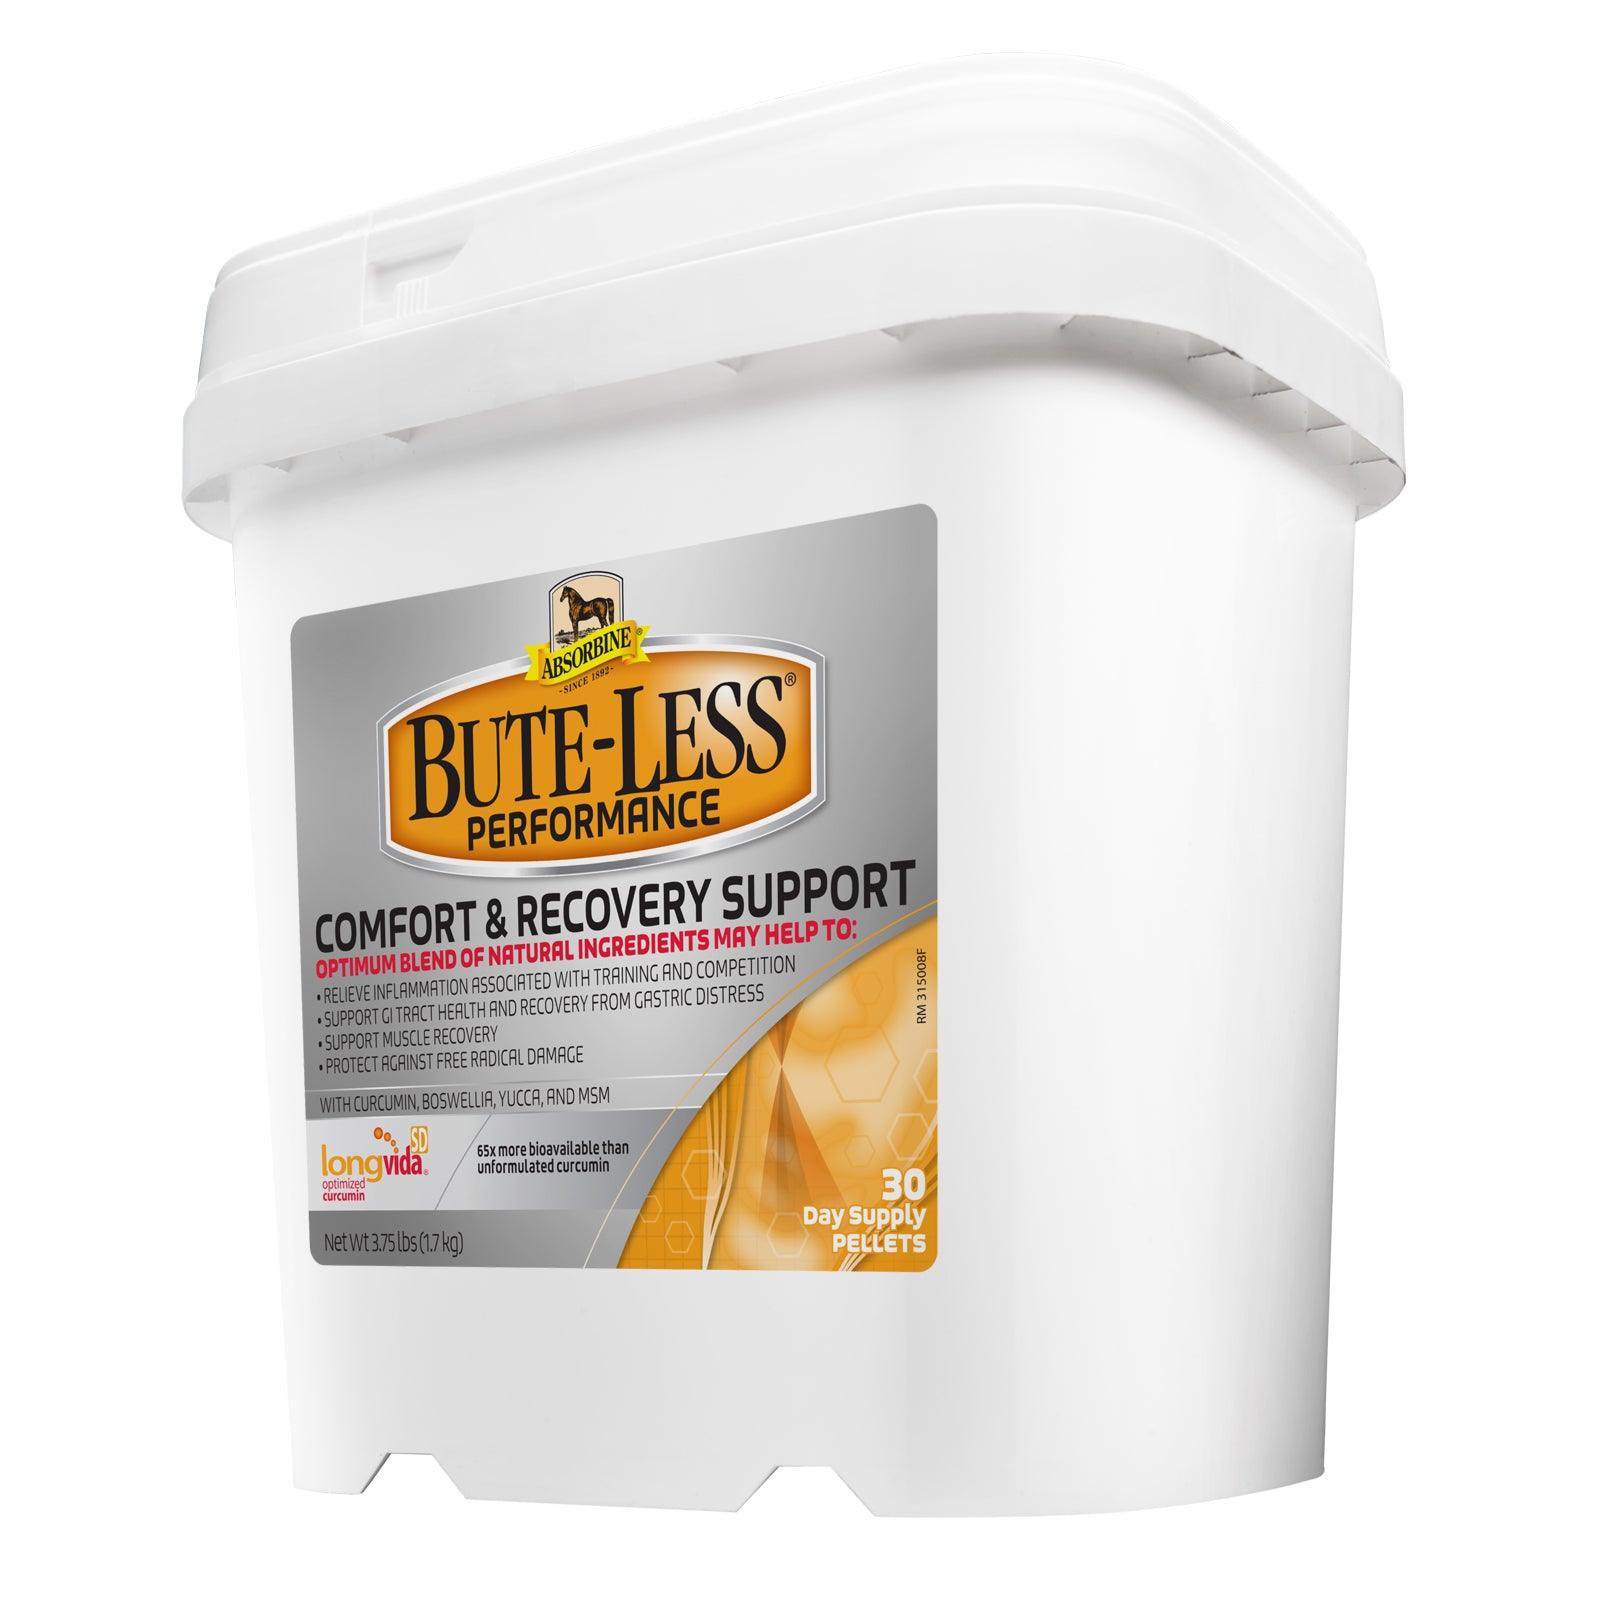 Absorbine Bute-less Performance comfort & recovery support 30 day supply of pellets bucket.  Show safe for your horse.